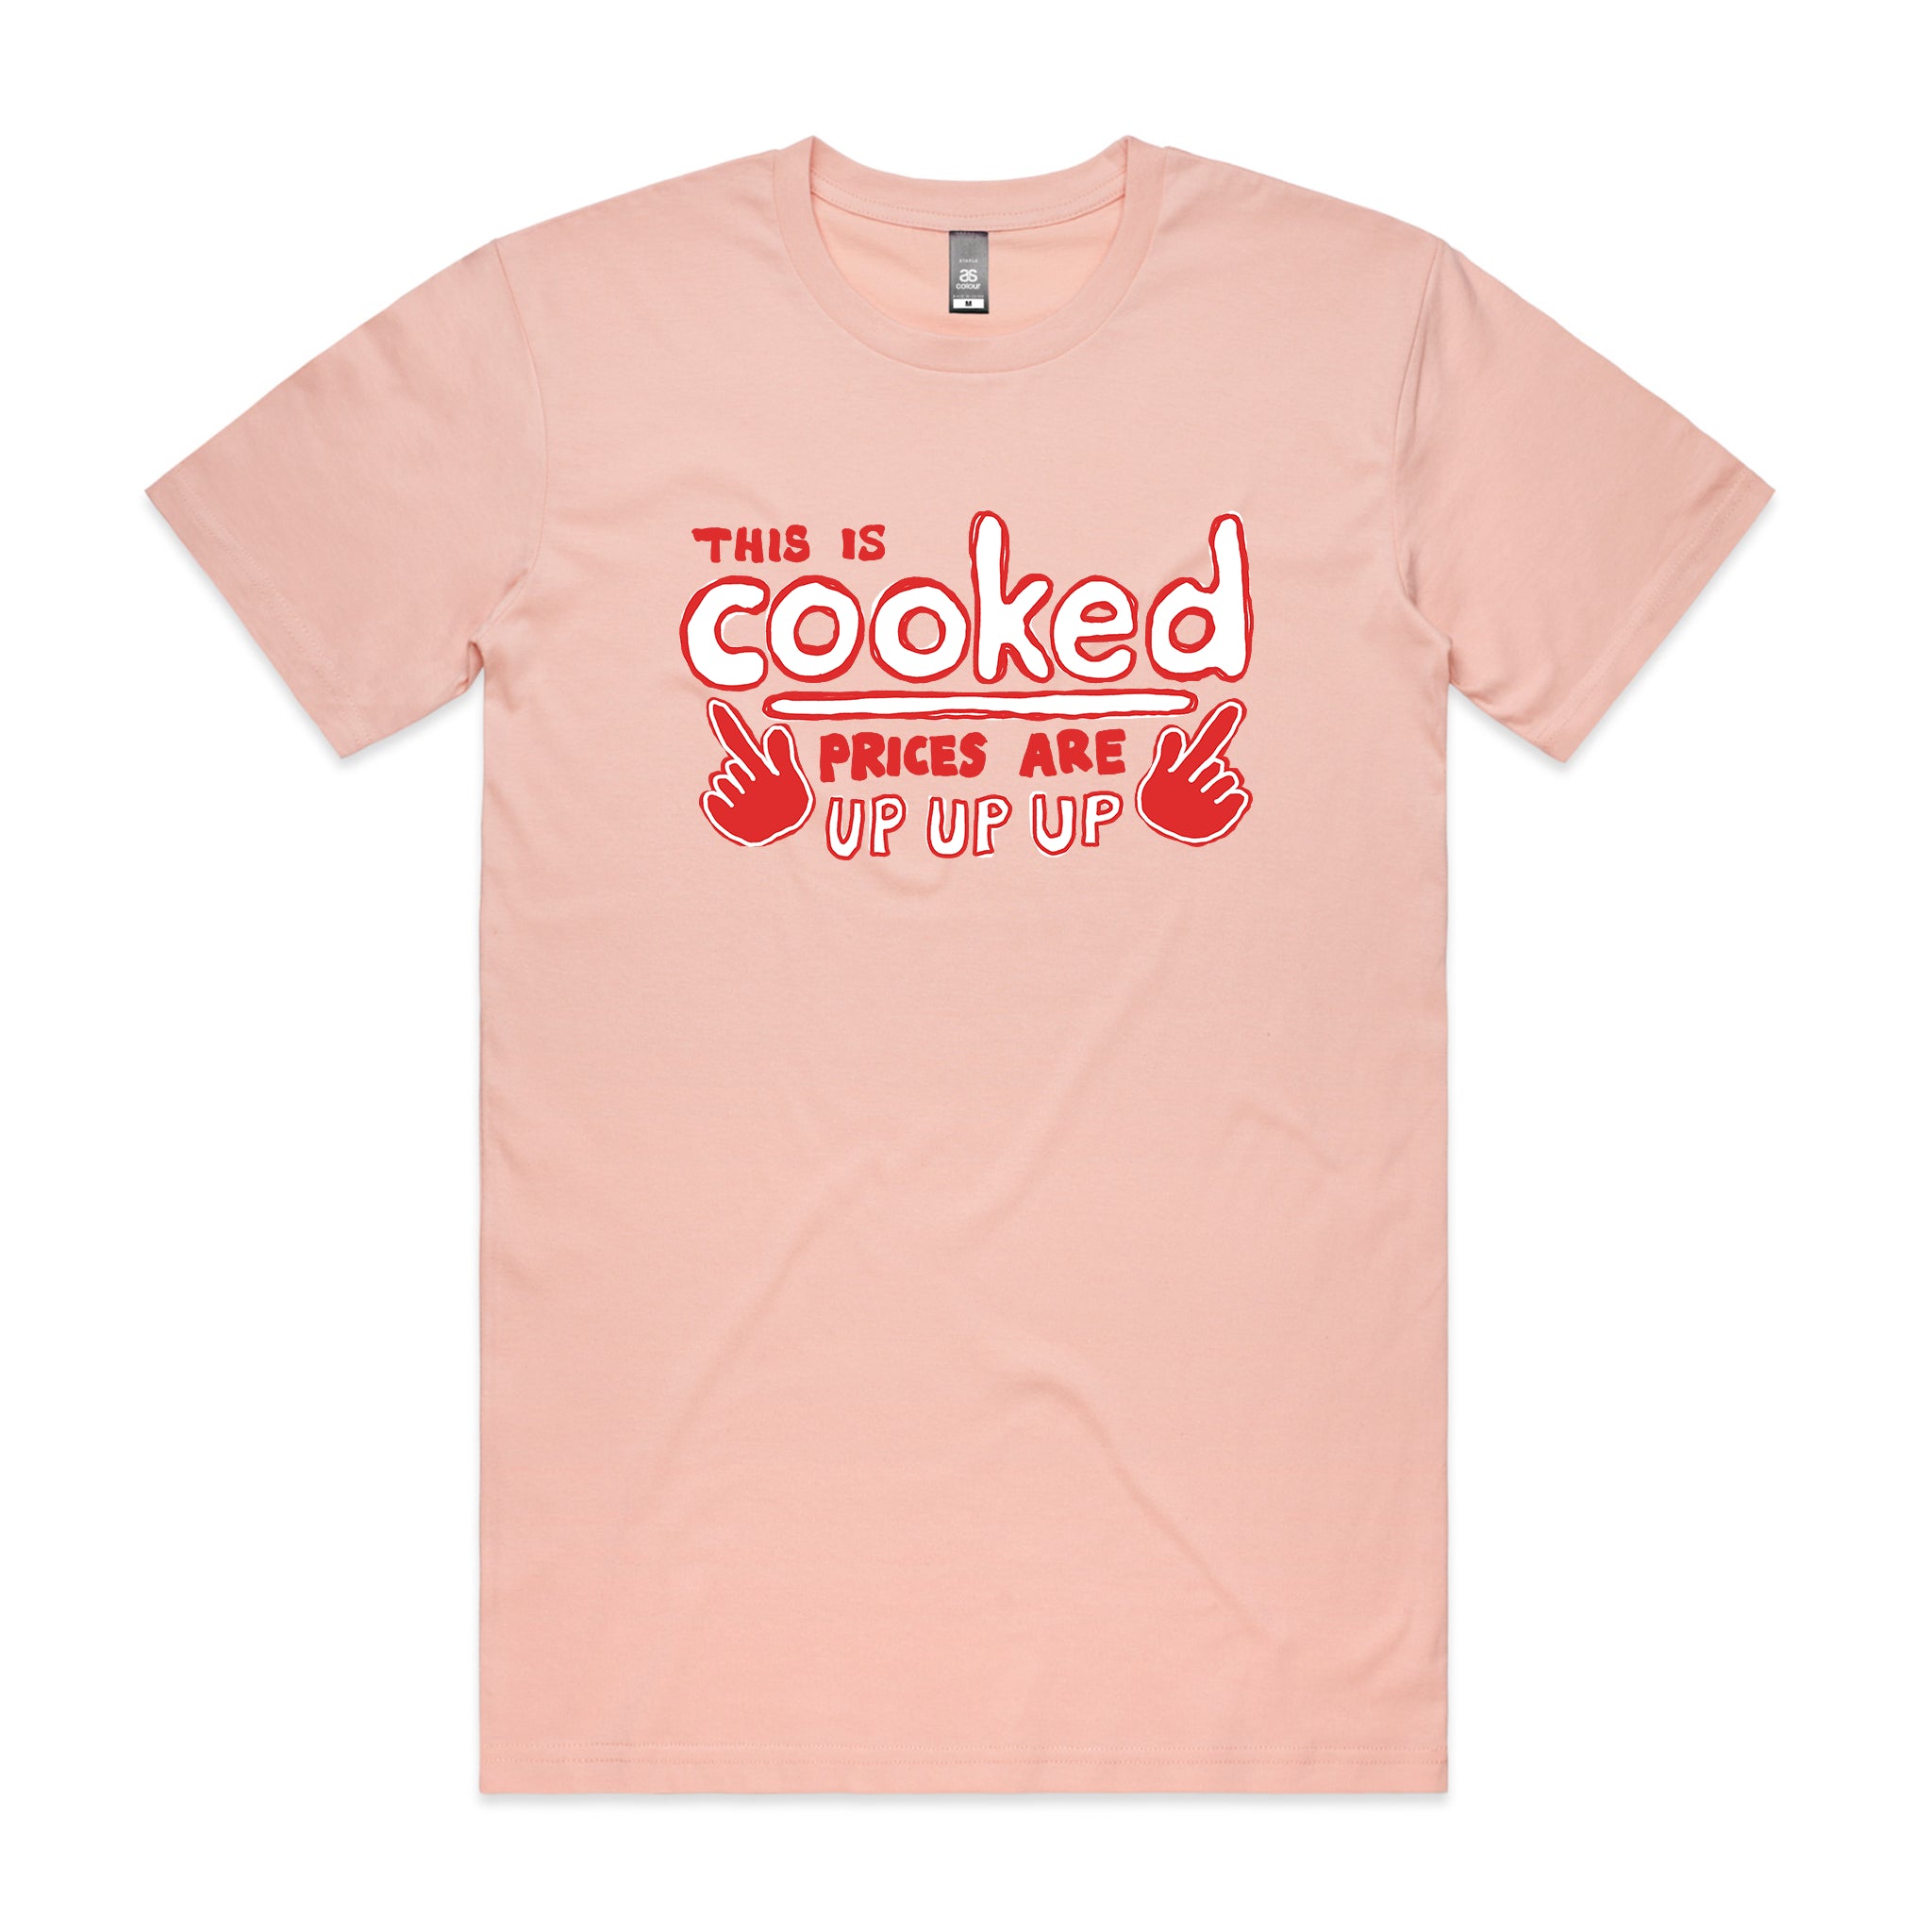 This Is Cooked Tee